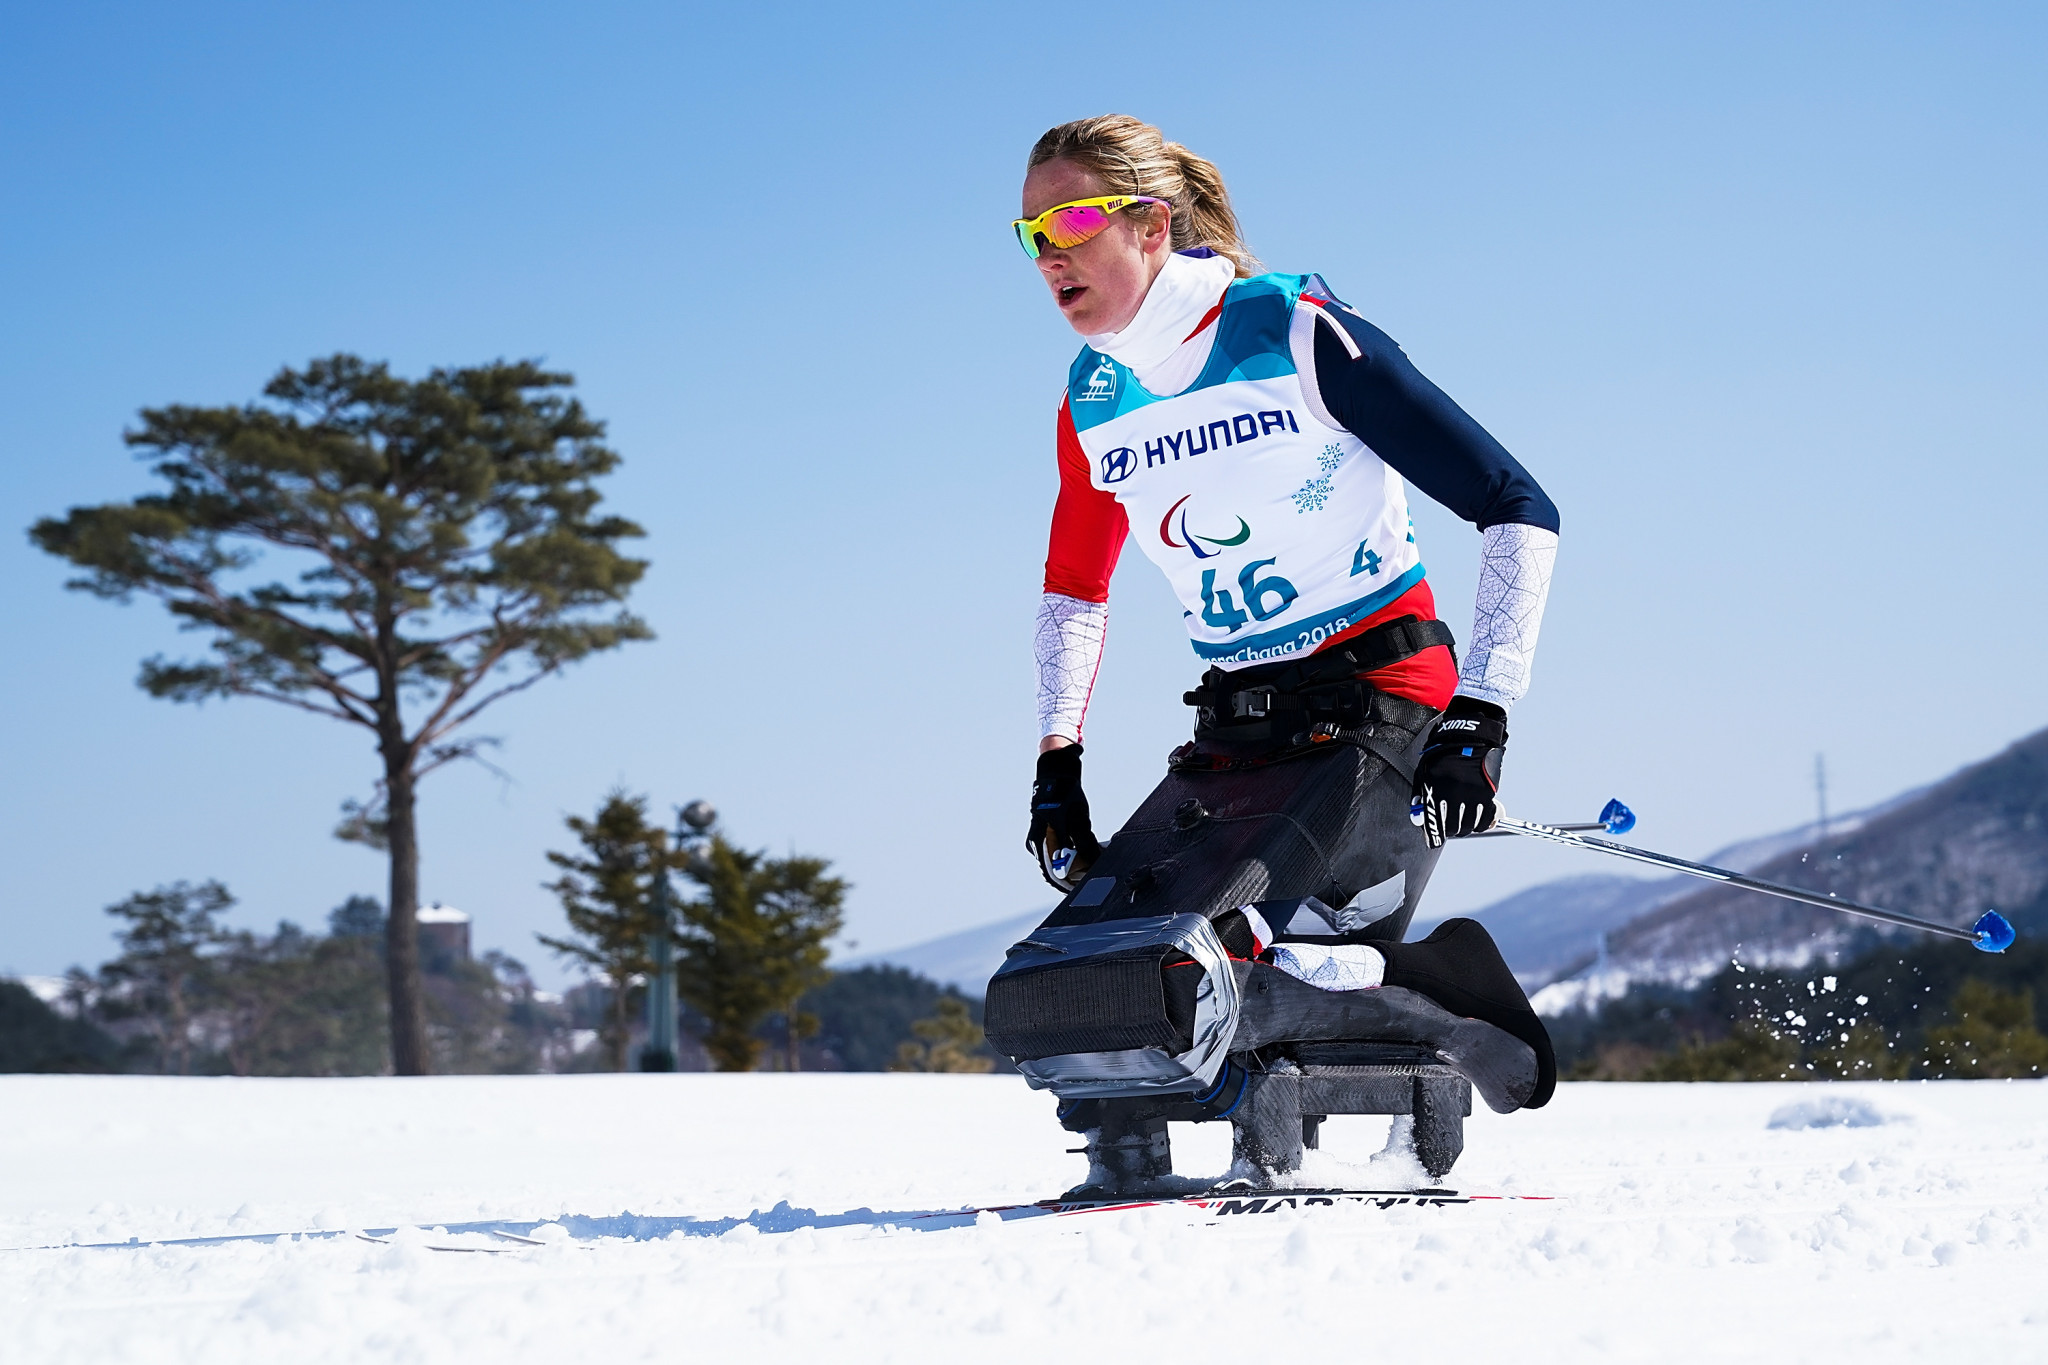 Skarstein adds skiing to rowing gold as Norway win two events at World Para Nordic Skiing World Cup